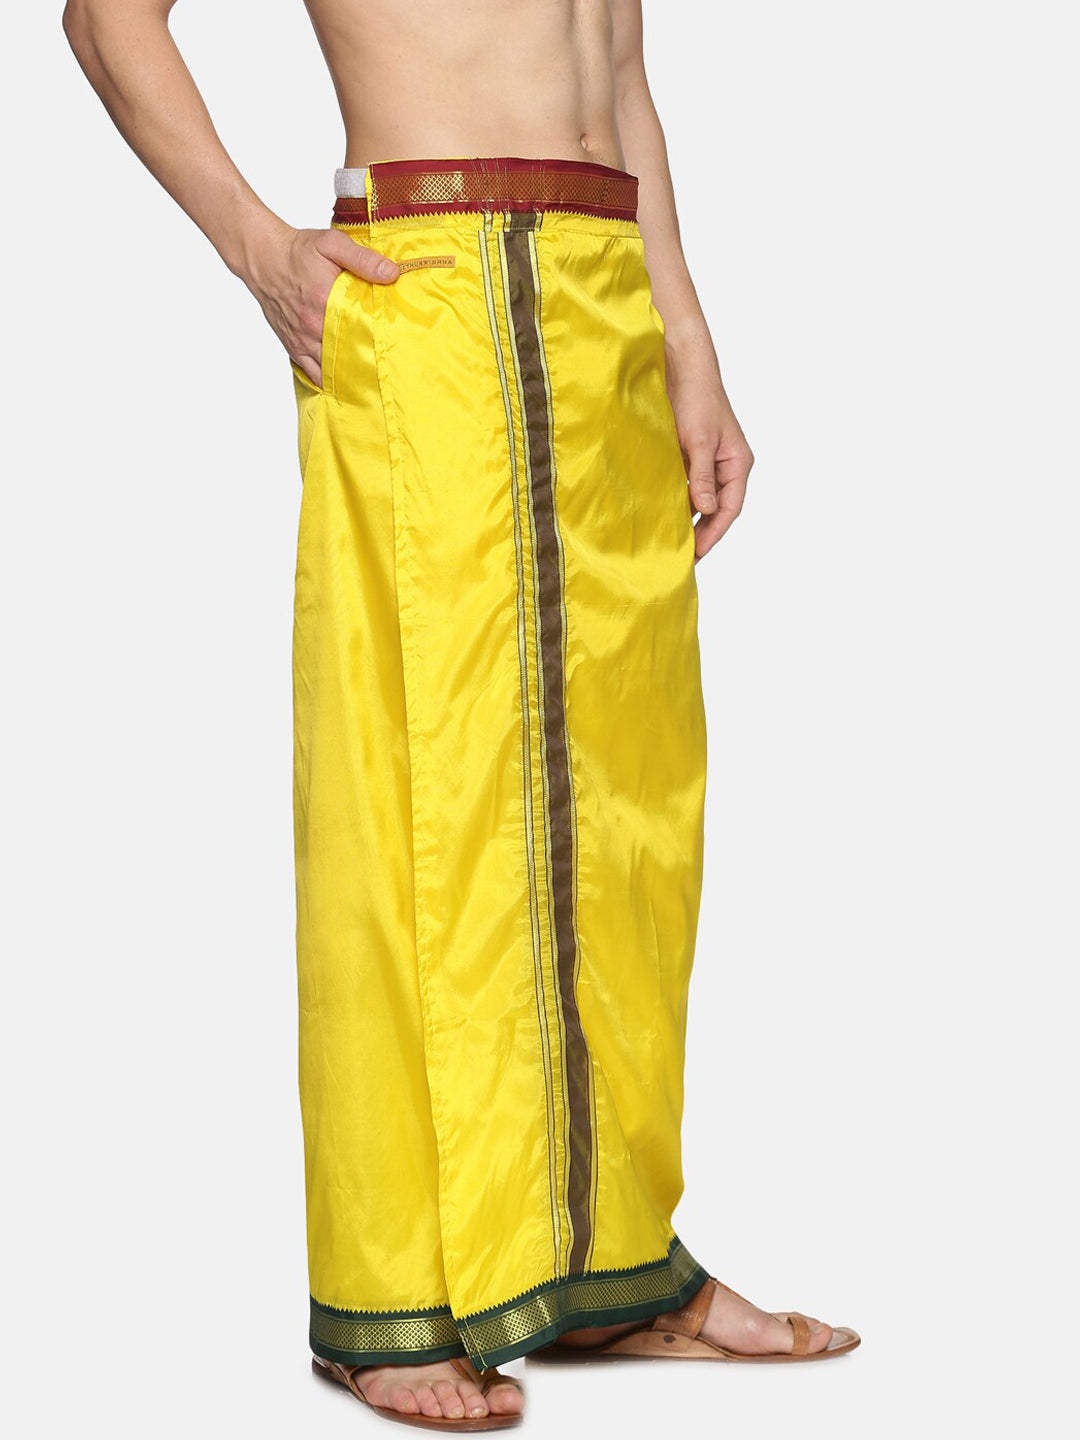 Beautiful Haldi Special Yellow Color Tulip Dhoti Pant With Spaghetti Blouse  With Jacket for Women, Partywear Wedding Outfit - Etsy